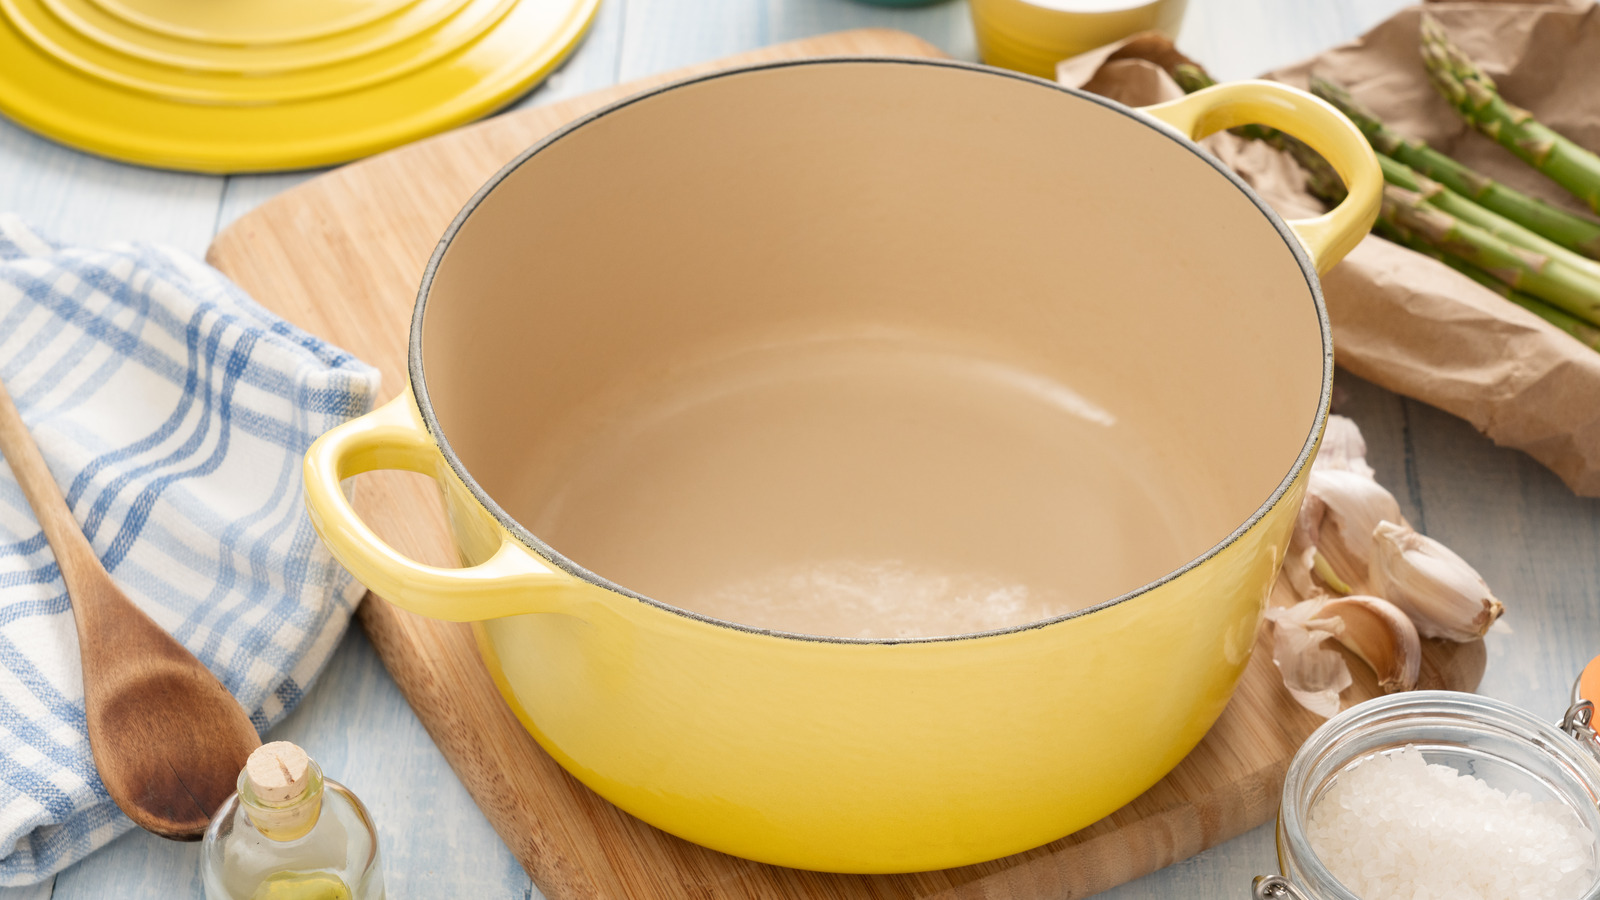 Le Creuset Just Released the Most Magical Holiday Dutch Oven We've Seen Yet